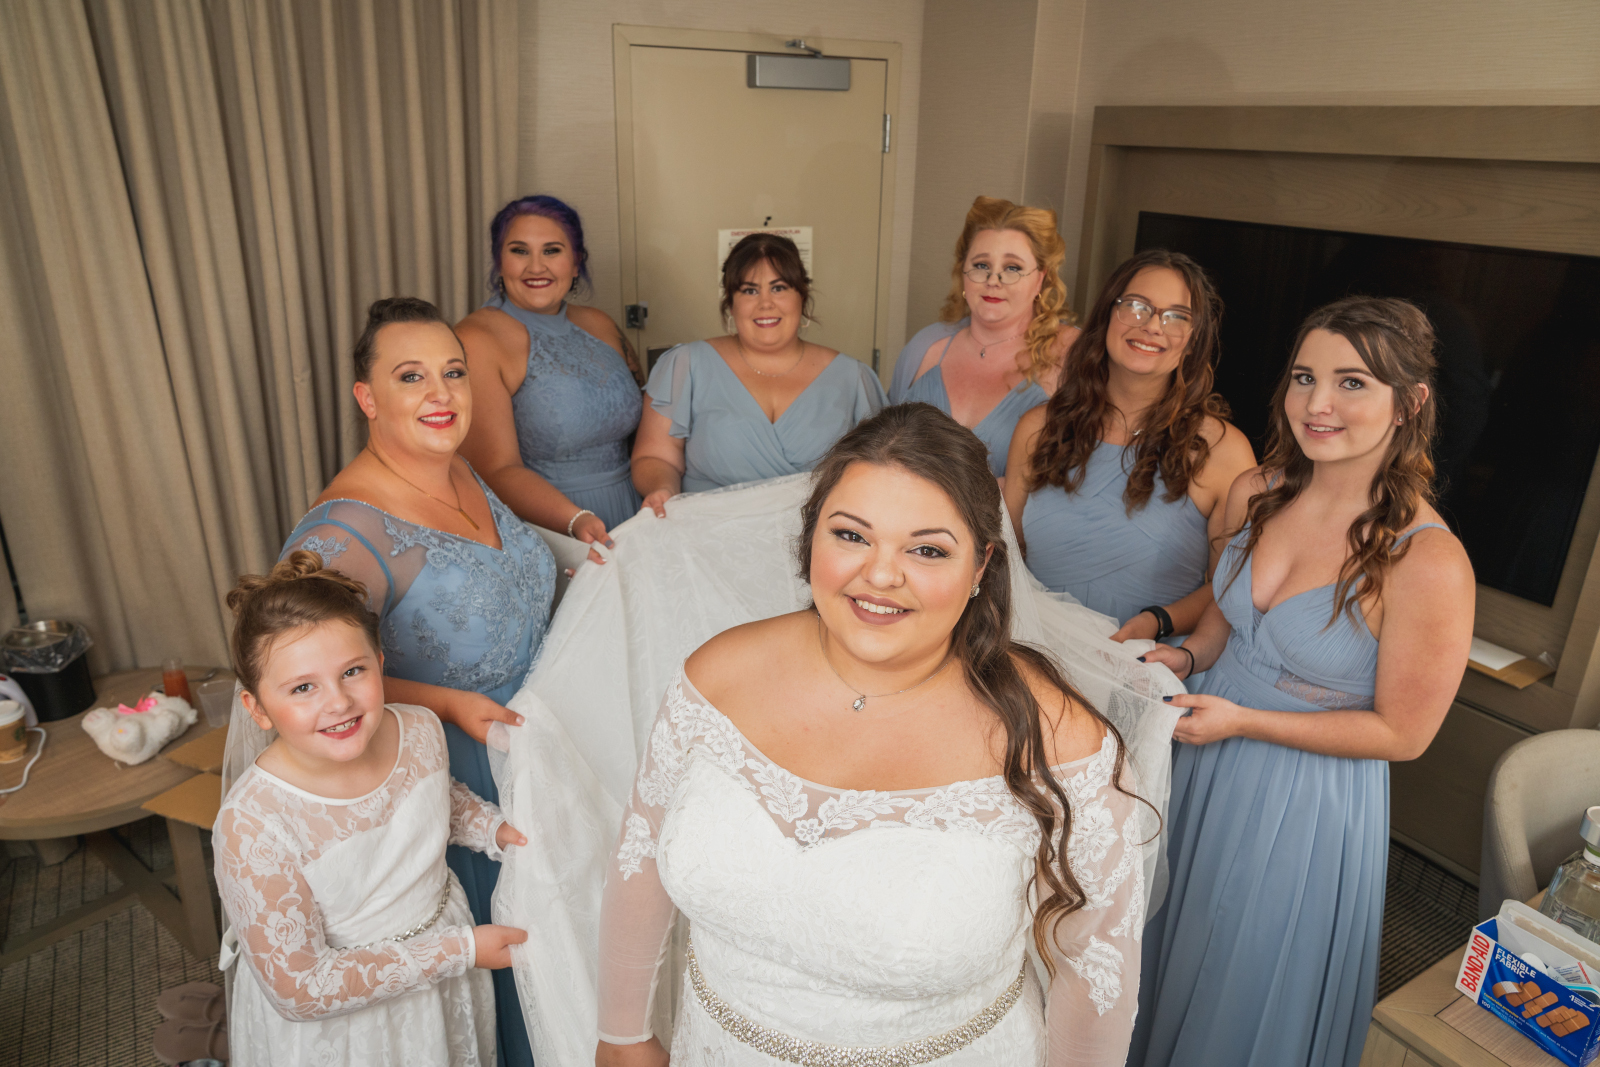 Bride with bridesmaids and flower girl holding up wedding dress train, getting ready, wedding preparation, bridal portrait, bridal party portrait, September wedding at Westfall Event Center